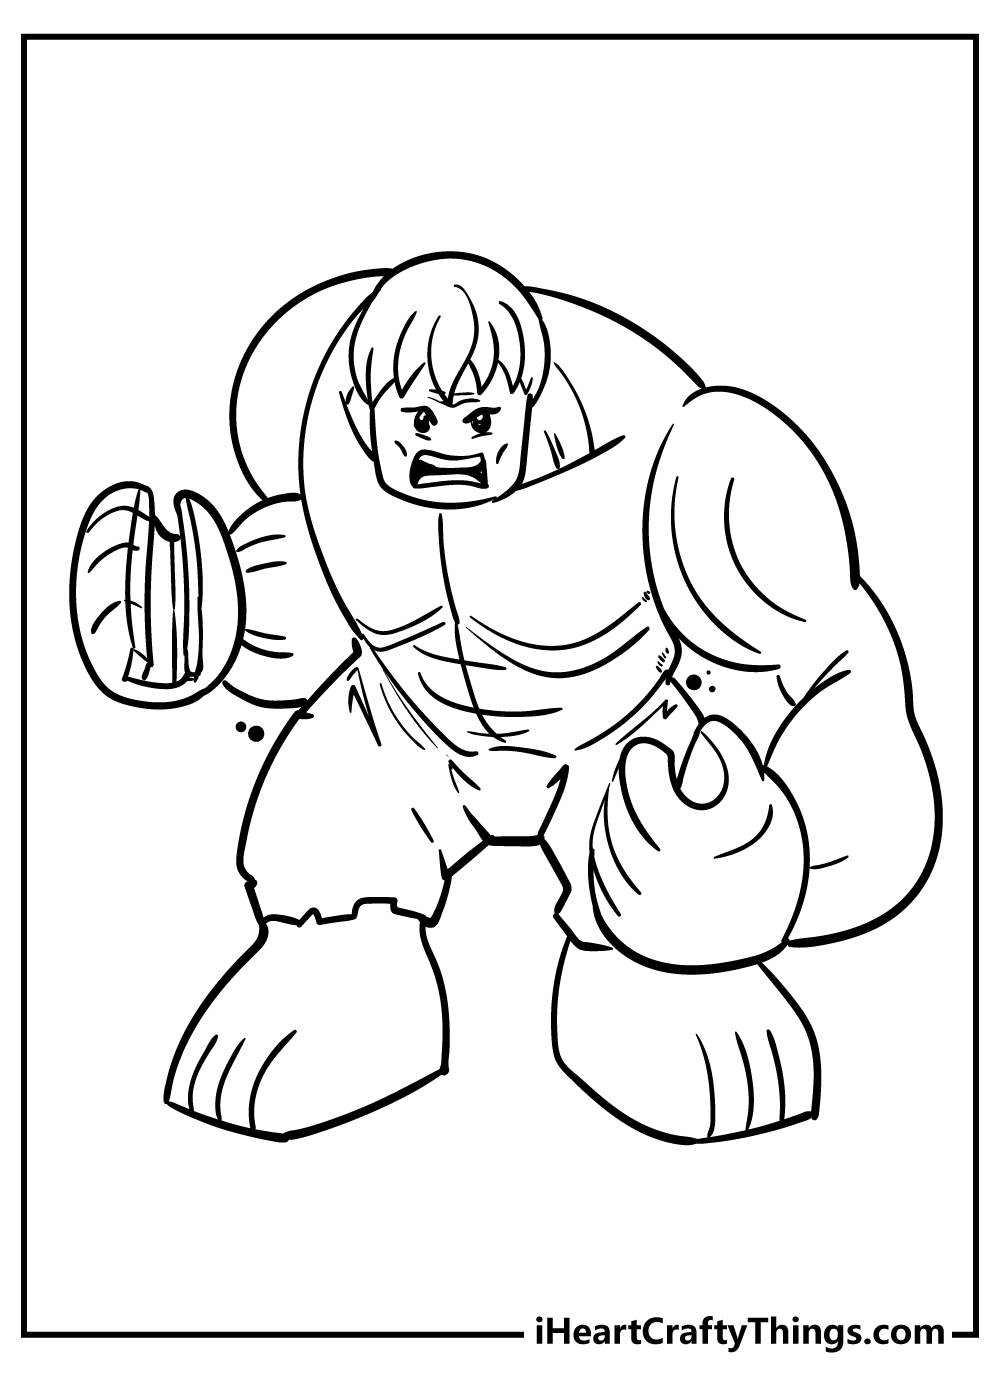 Lego avengers coloring pages free printables